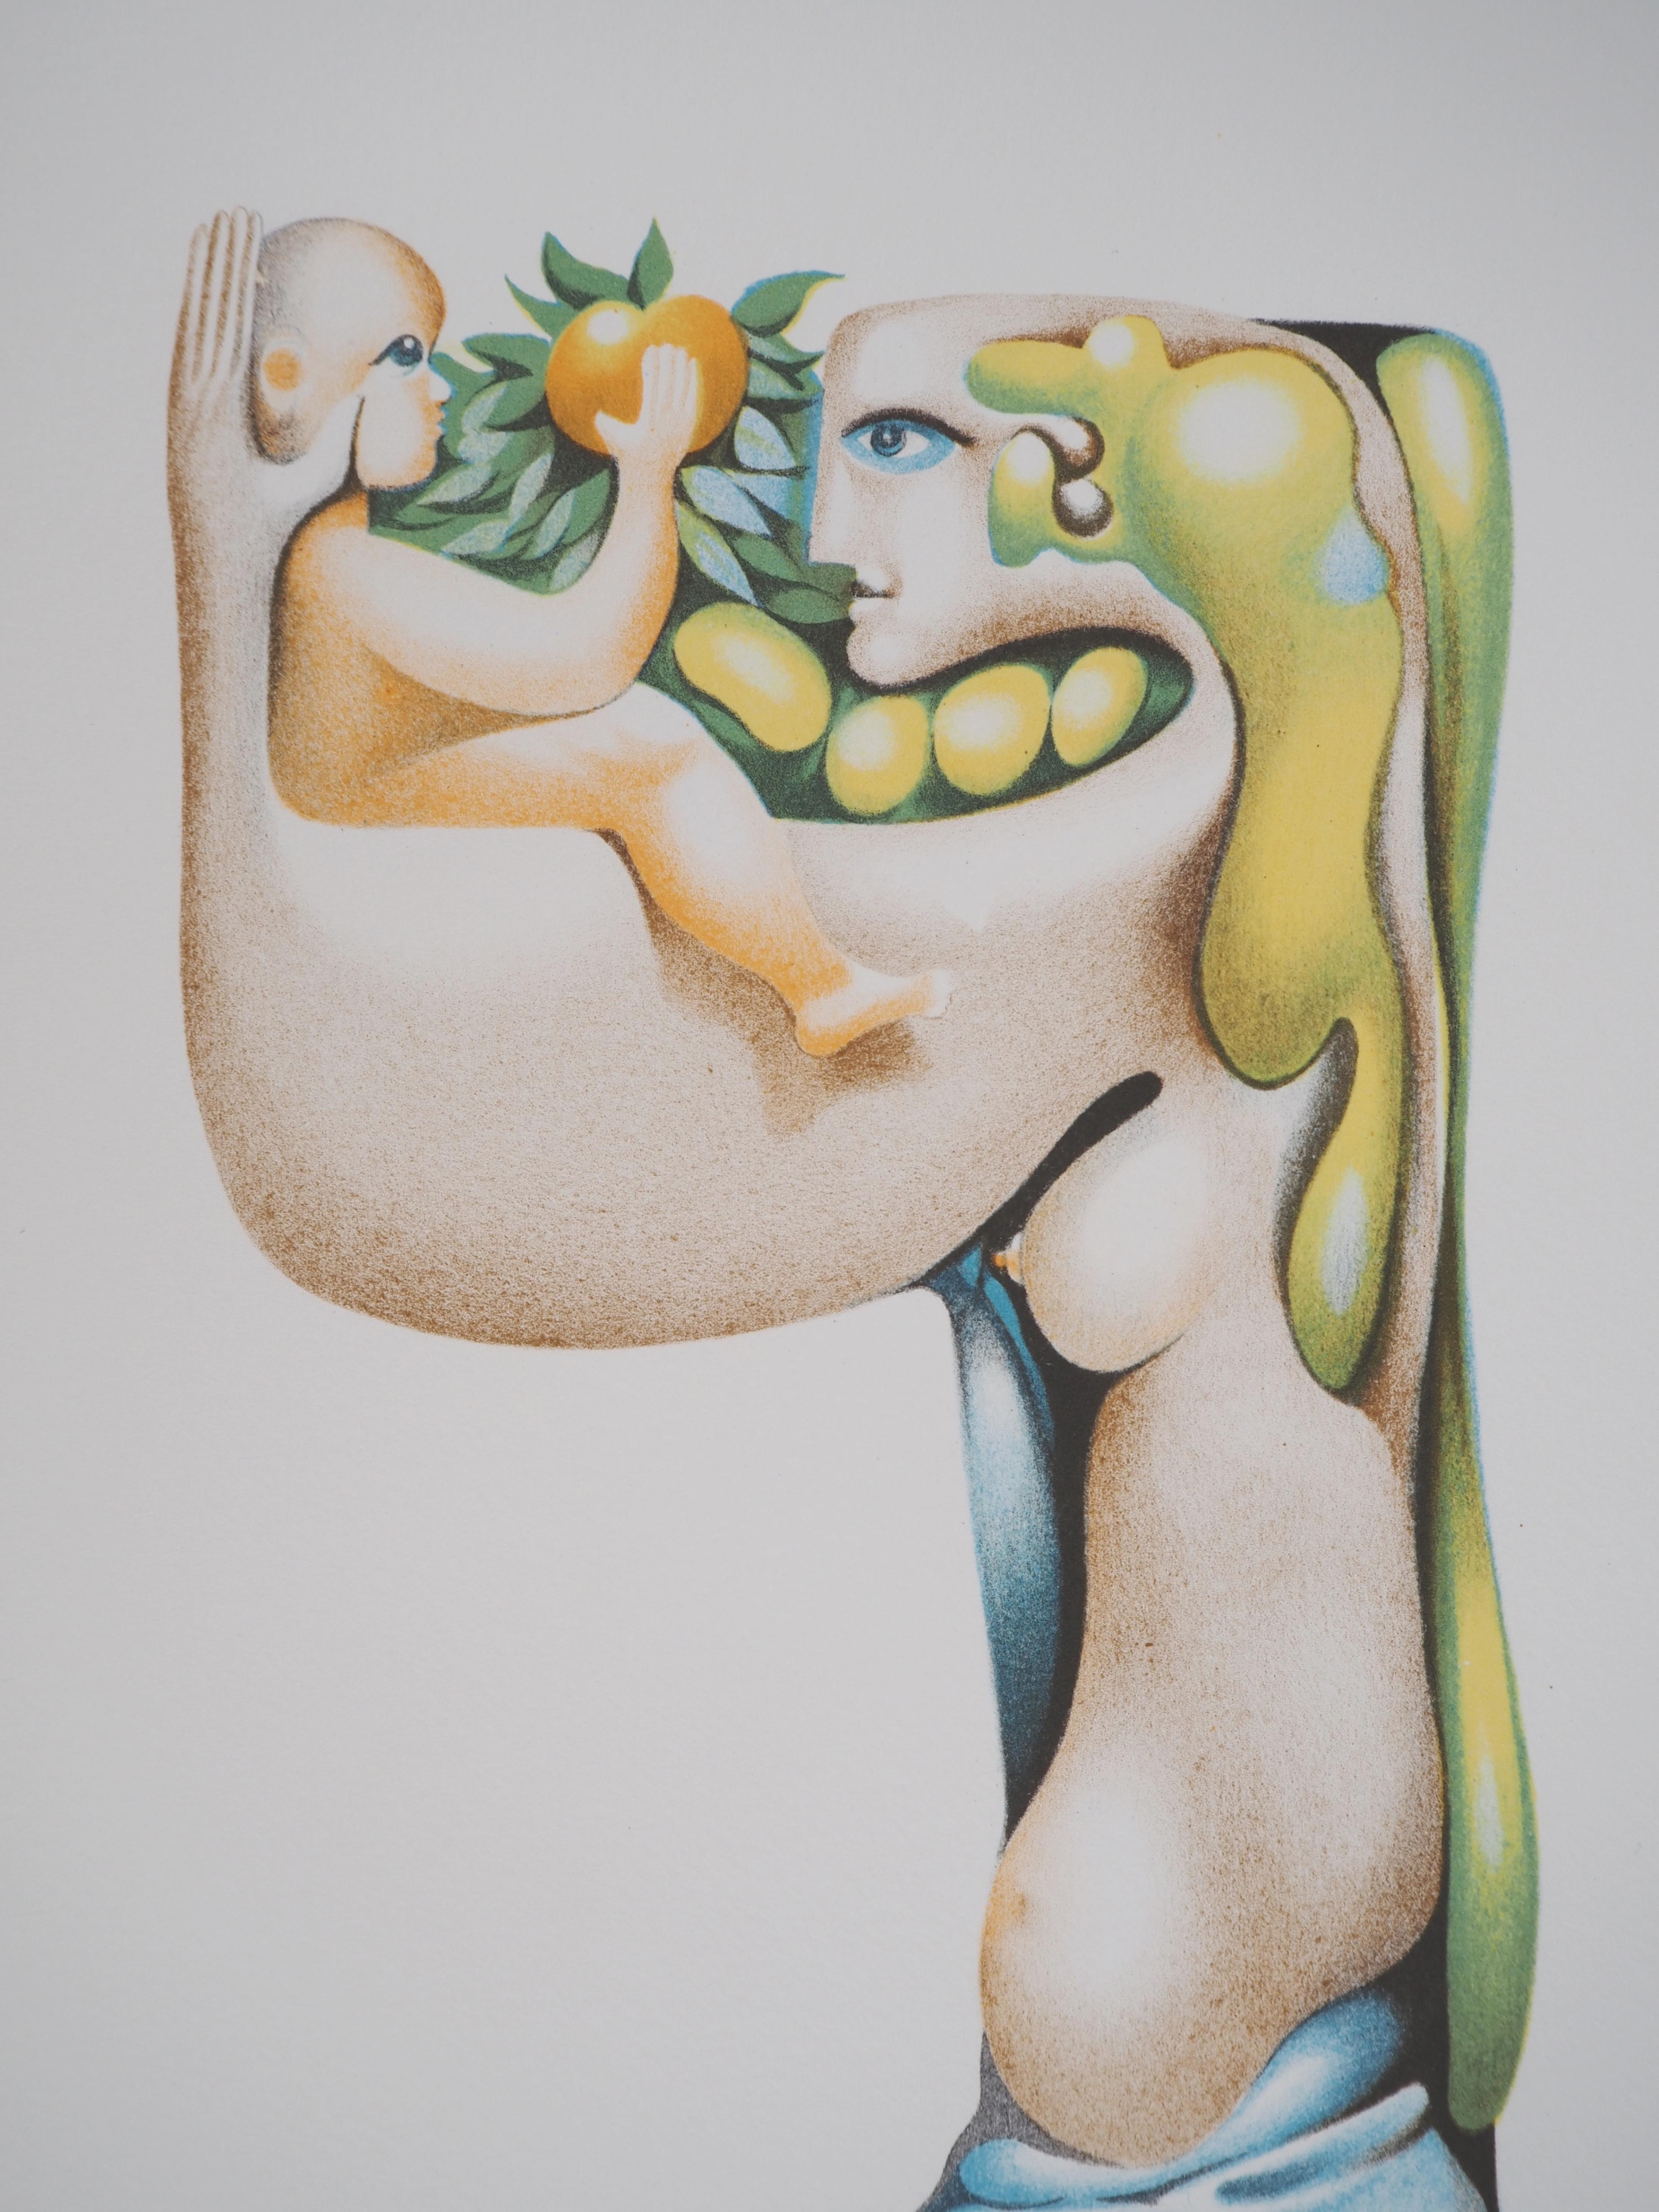 Mystic Maternity : Child with an Apple - Original lithograph, Signed - Surrealist Print by Jules PERAHIM